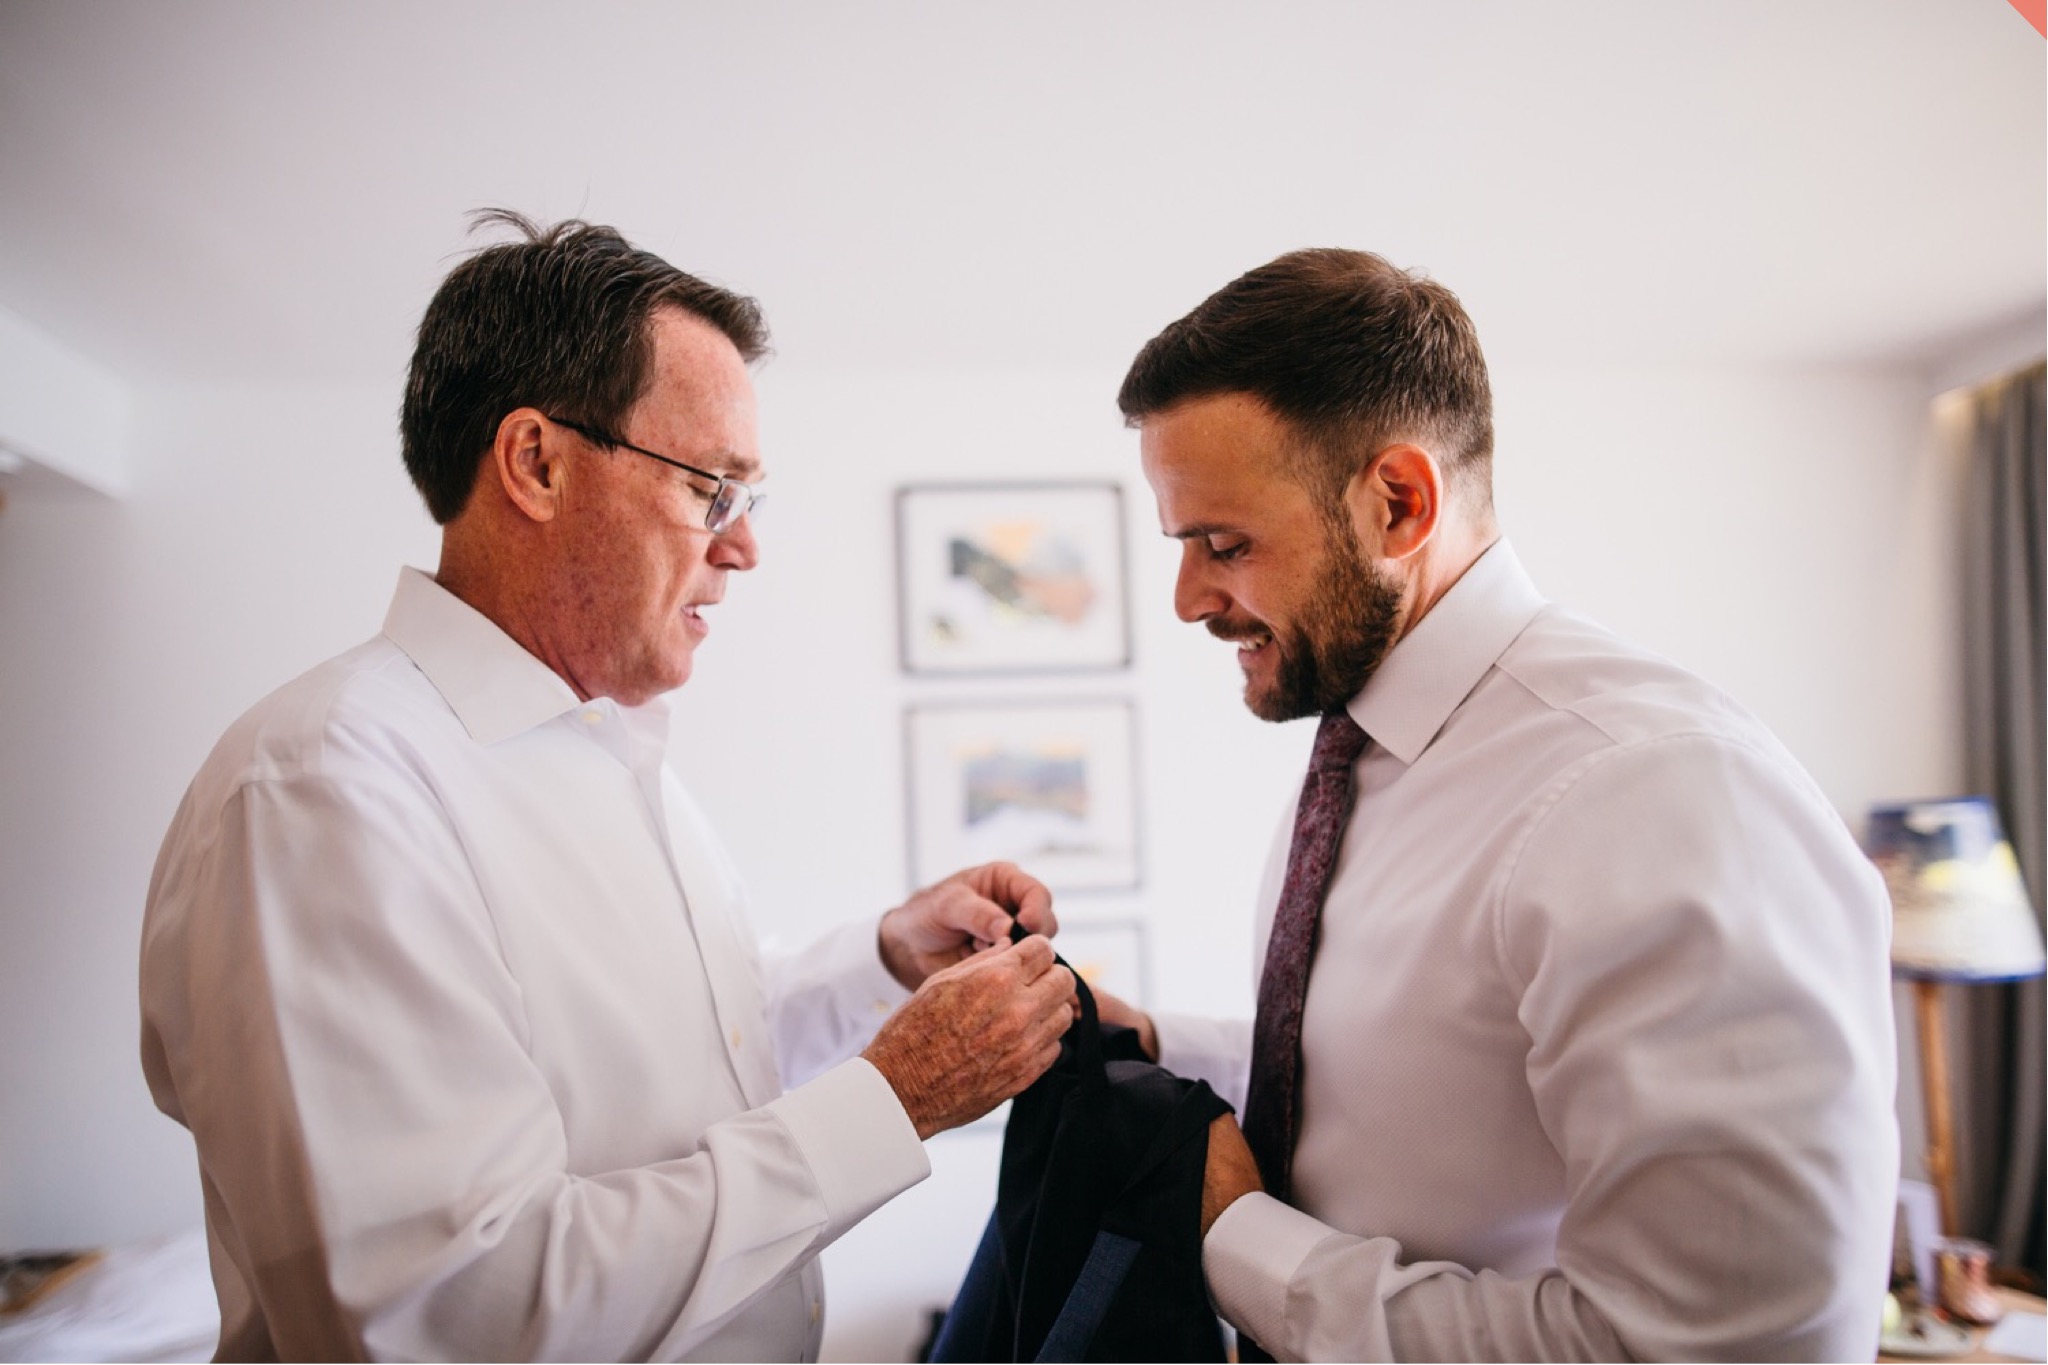 The groom gets help with his suit jacket as he gets ready for the wedding.